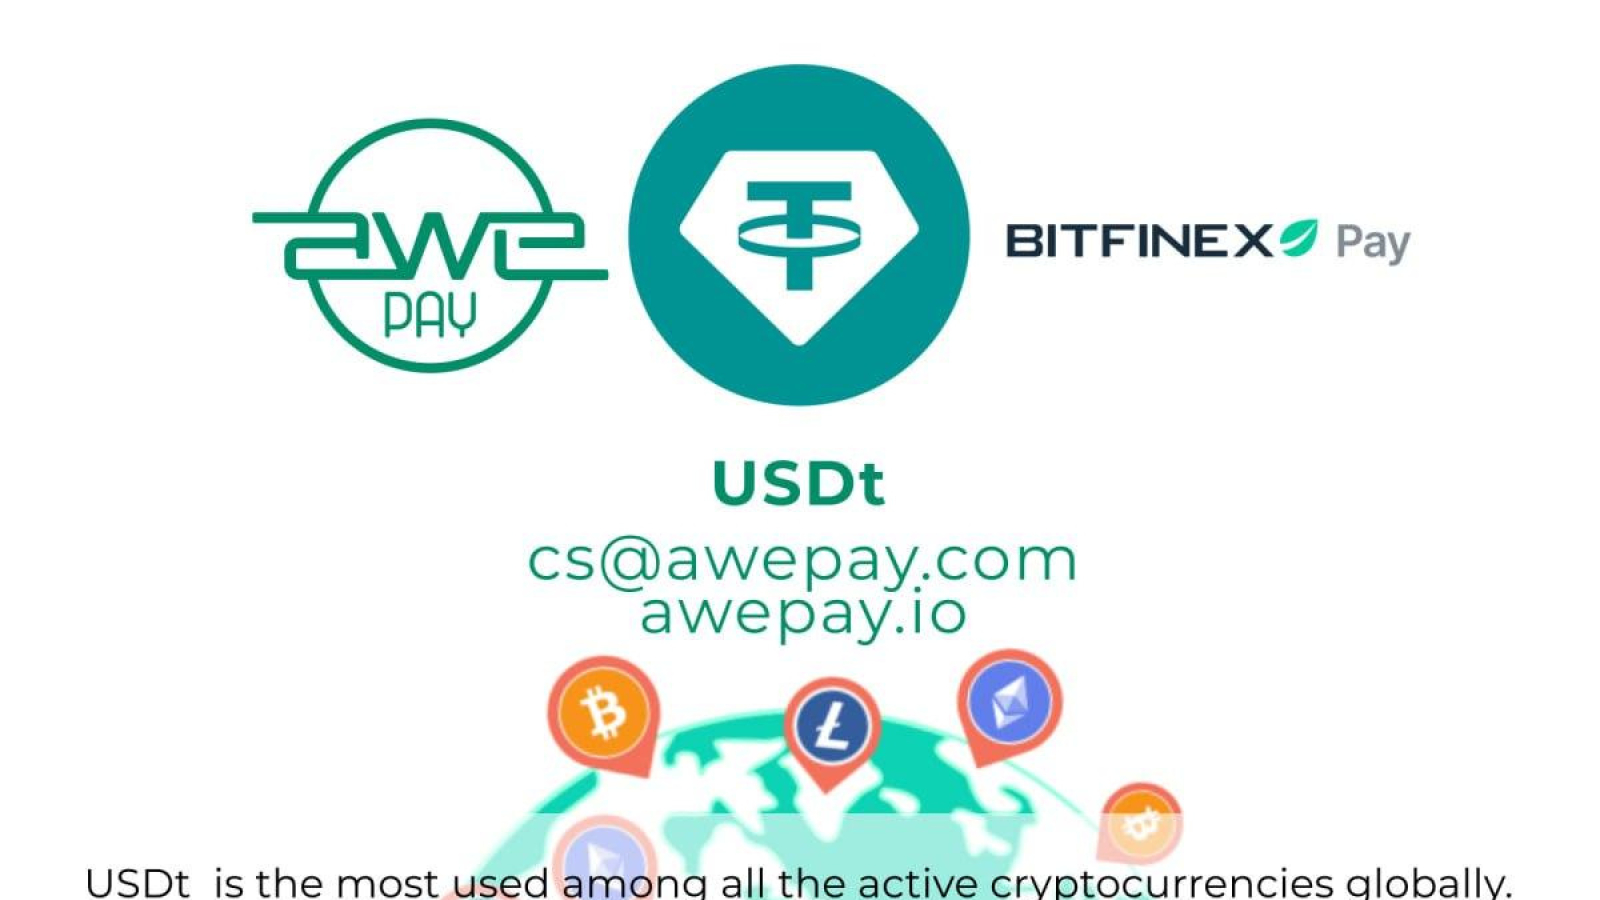 Bitfinex Pay and Awepay for Enterprise Payments Collaboration